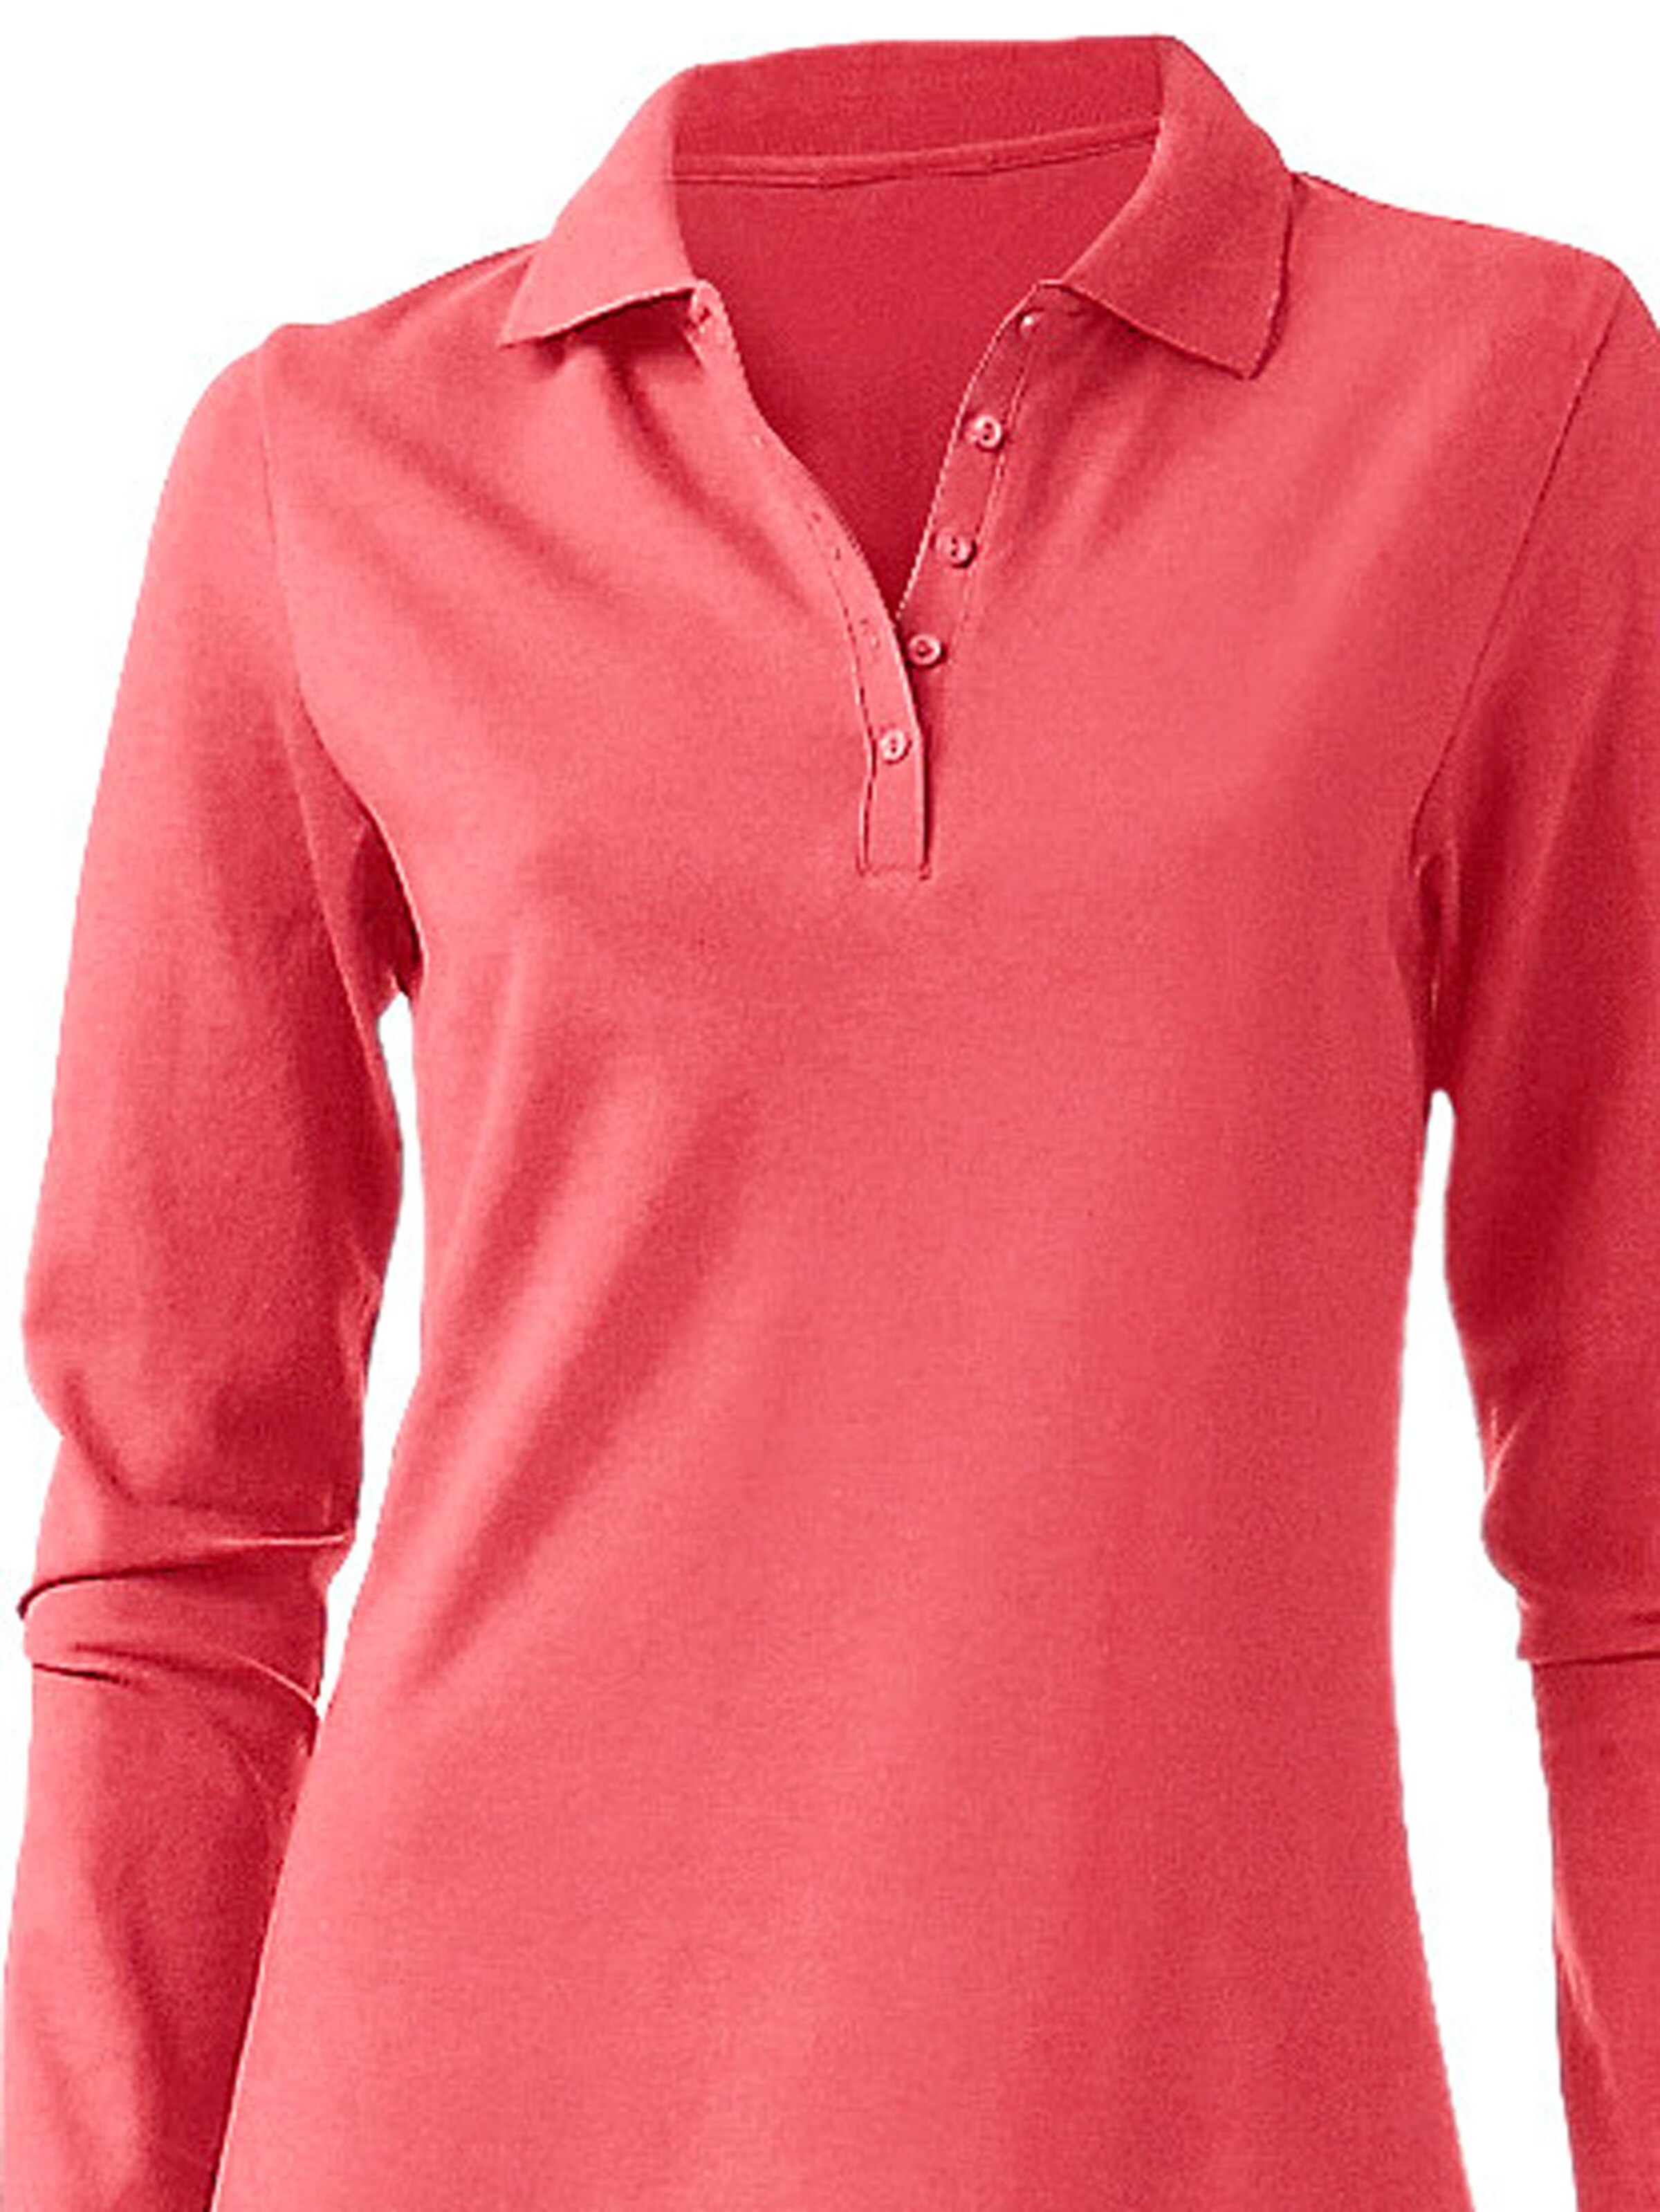 Damenmode Shirts Best Connections Poloshirt in koralle 